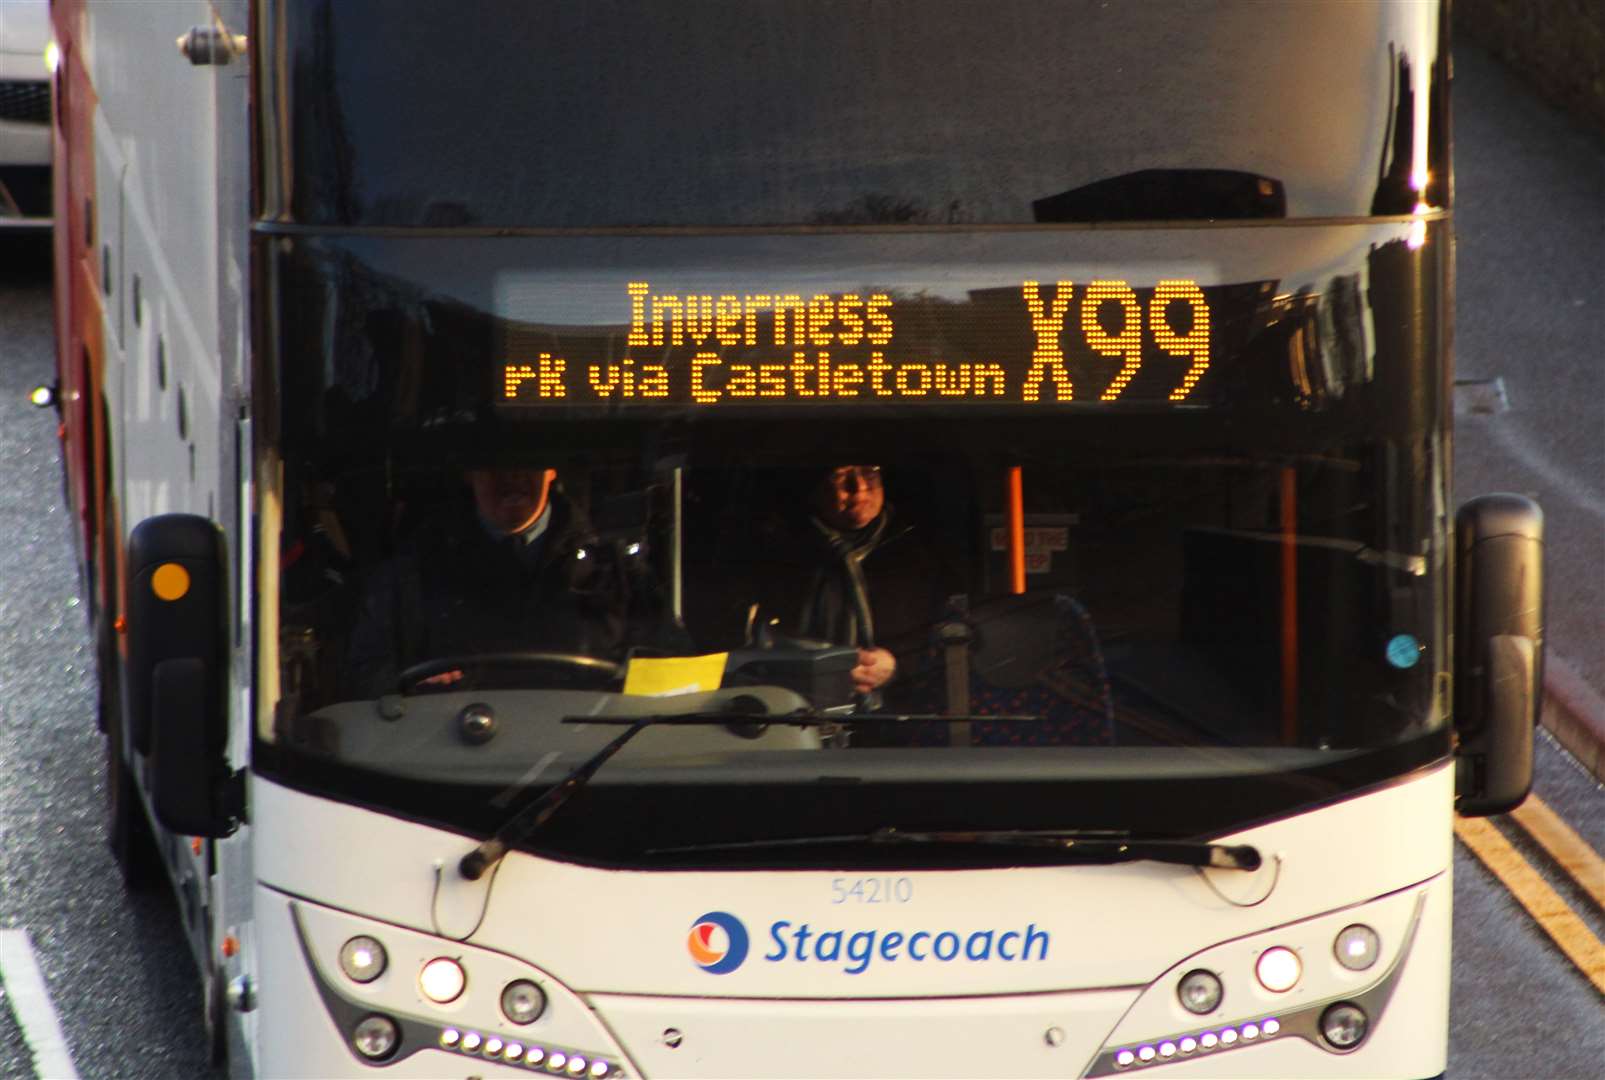 Stagecoach will be running a reduced service across the region.